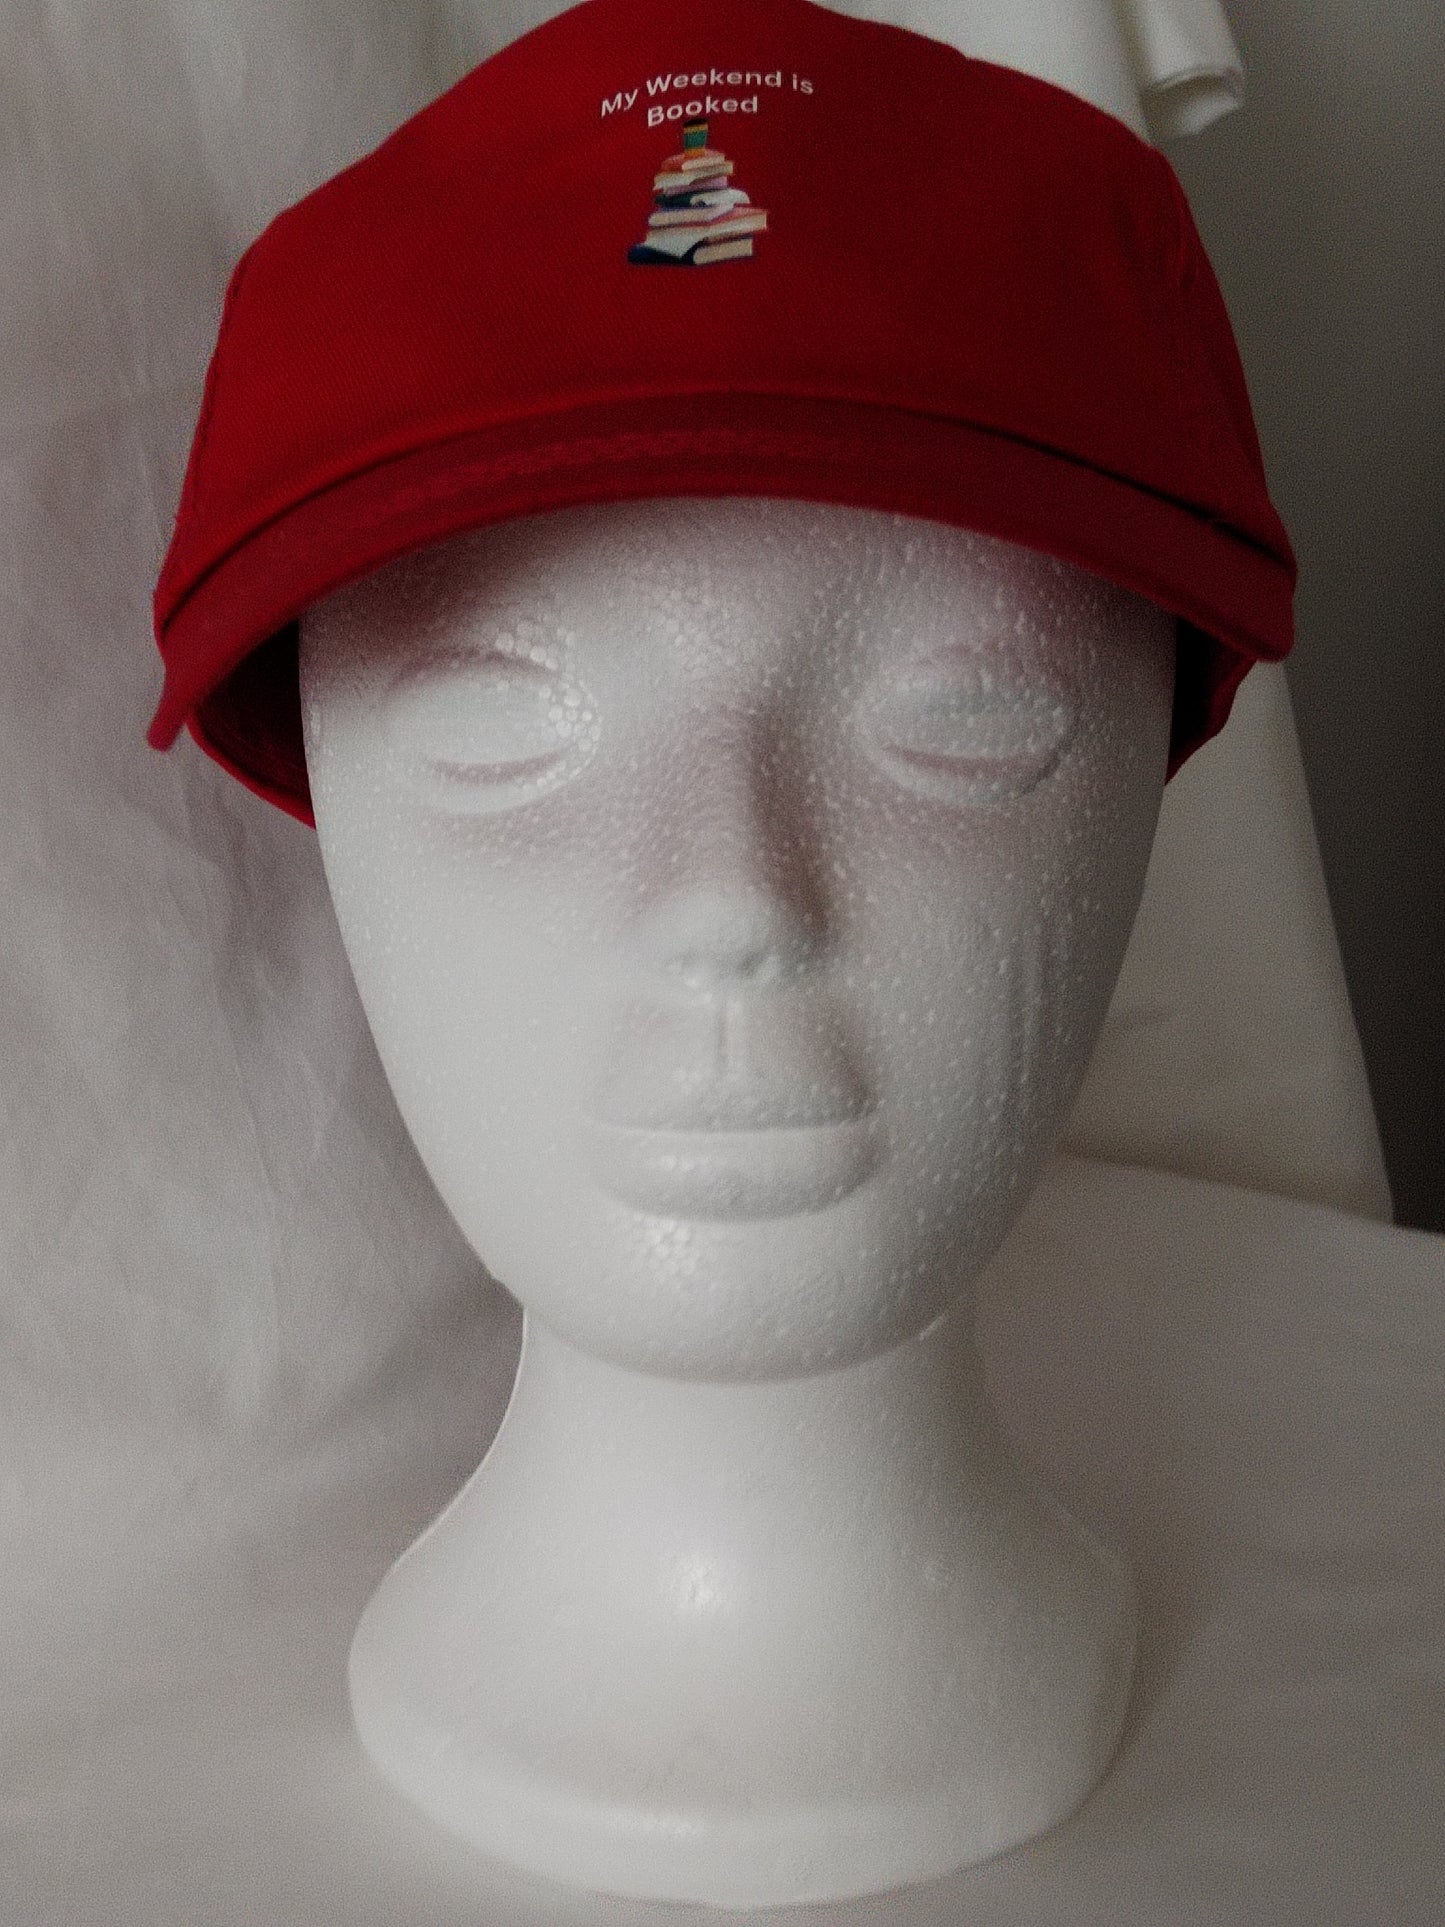 Red 'My Weekend is Booked' Cap